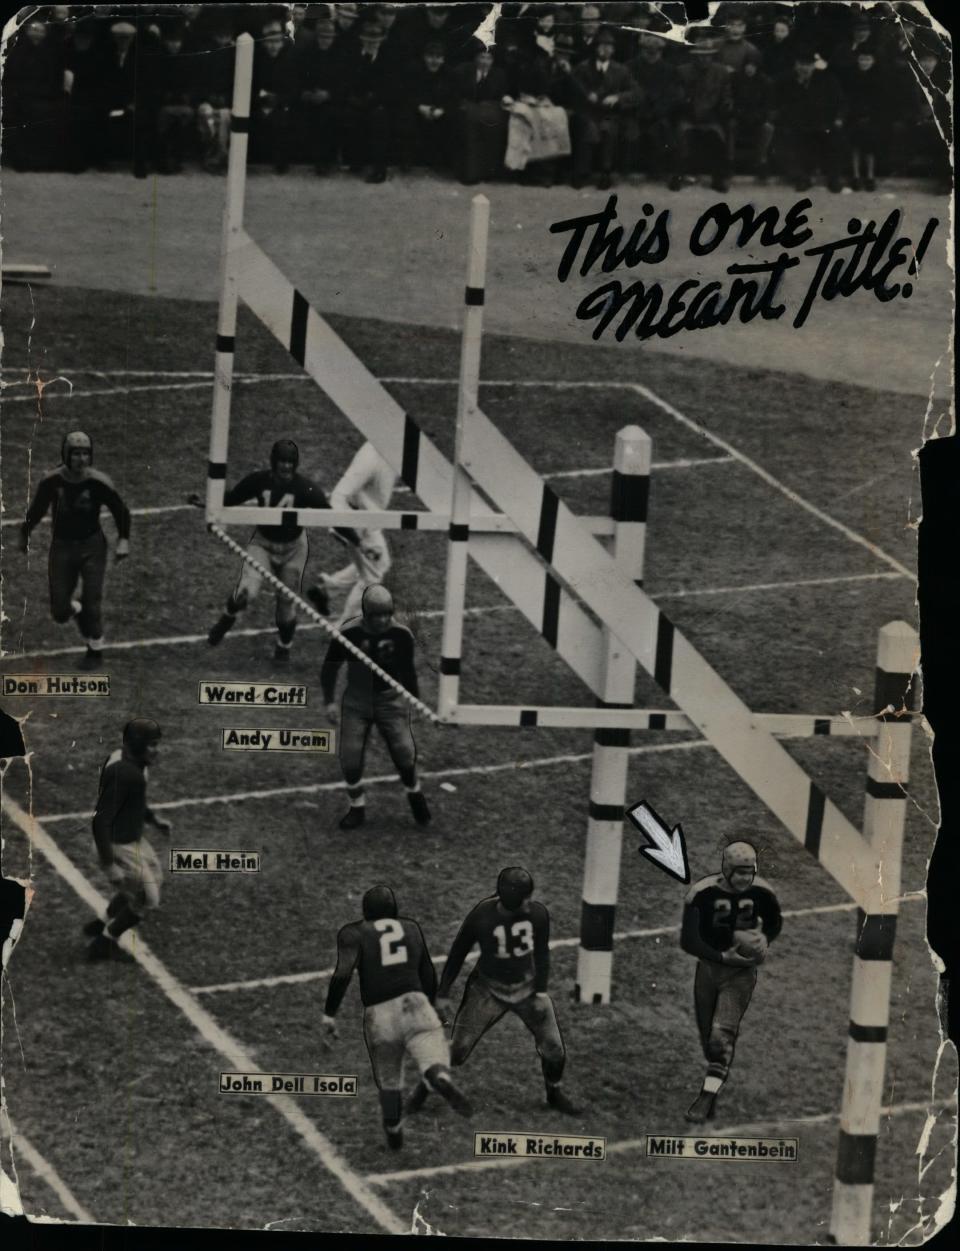 In this file photo, Milt Gantenbein catches the first touchdown pass of the day as Green Bay defeated the New York Giants, 27-0, for the world championship in 1939.